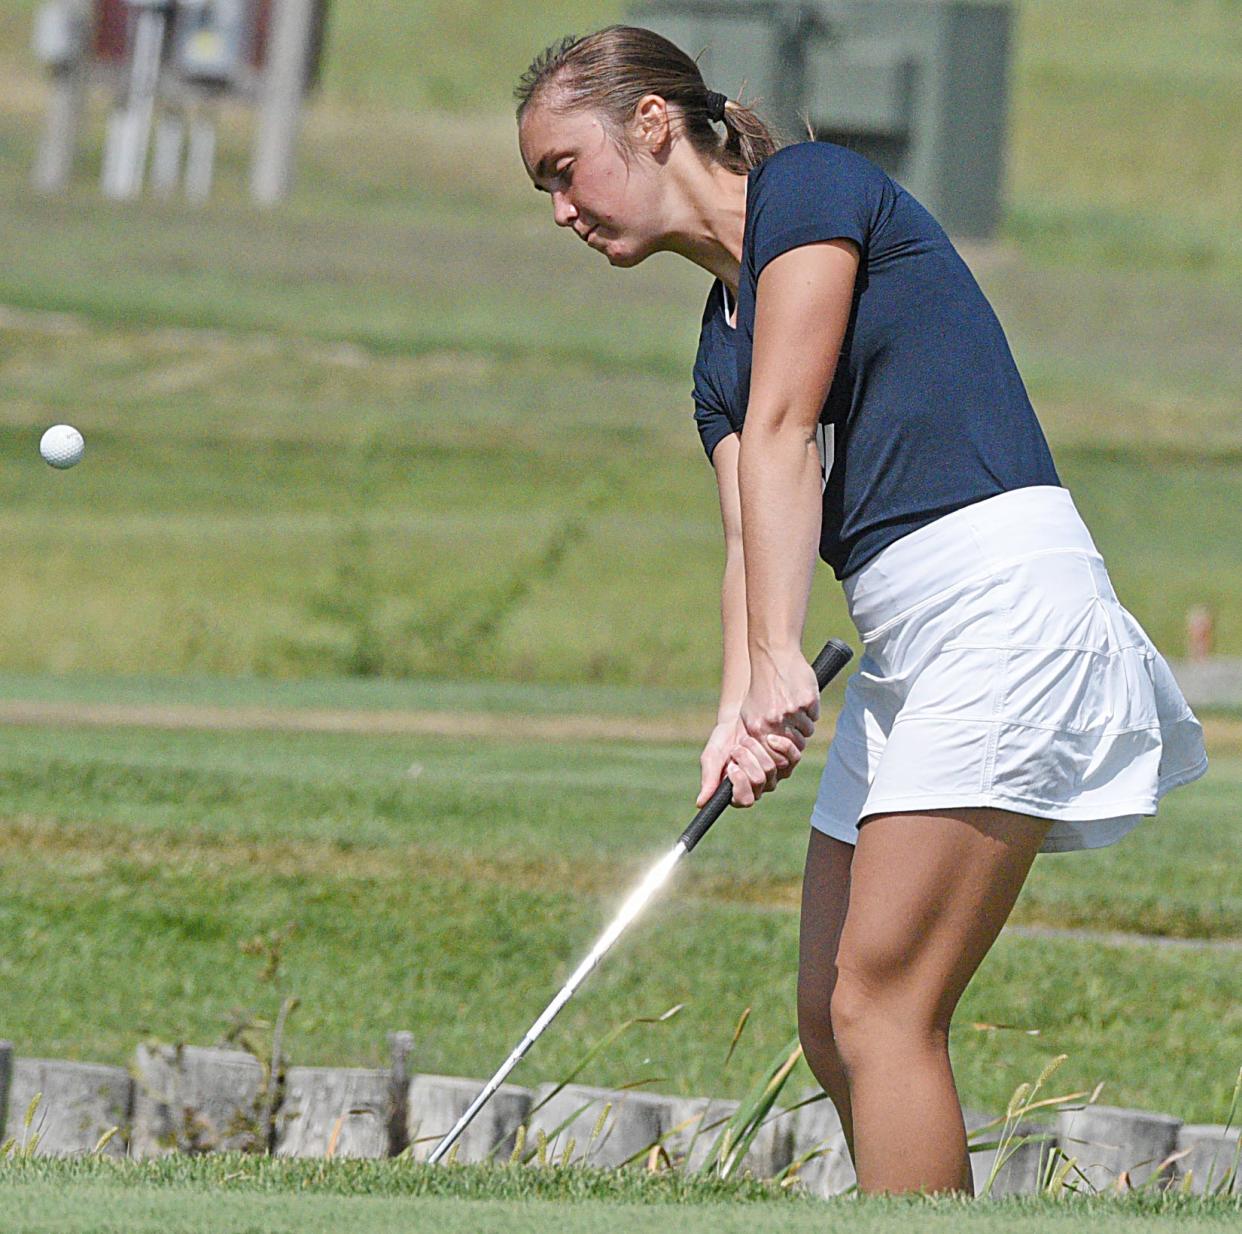 Mount Marty's Kelsey Heath hits a shot toward the the No. 9 green during the opening round of the 2023 Mount Marty Invitational women's golf tournament recently at Fox Run Golf Course in Yankton. Heath is a junior from Sisseton.